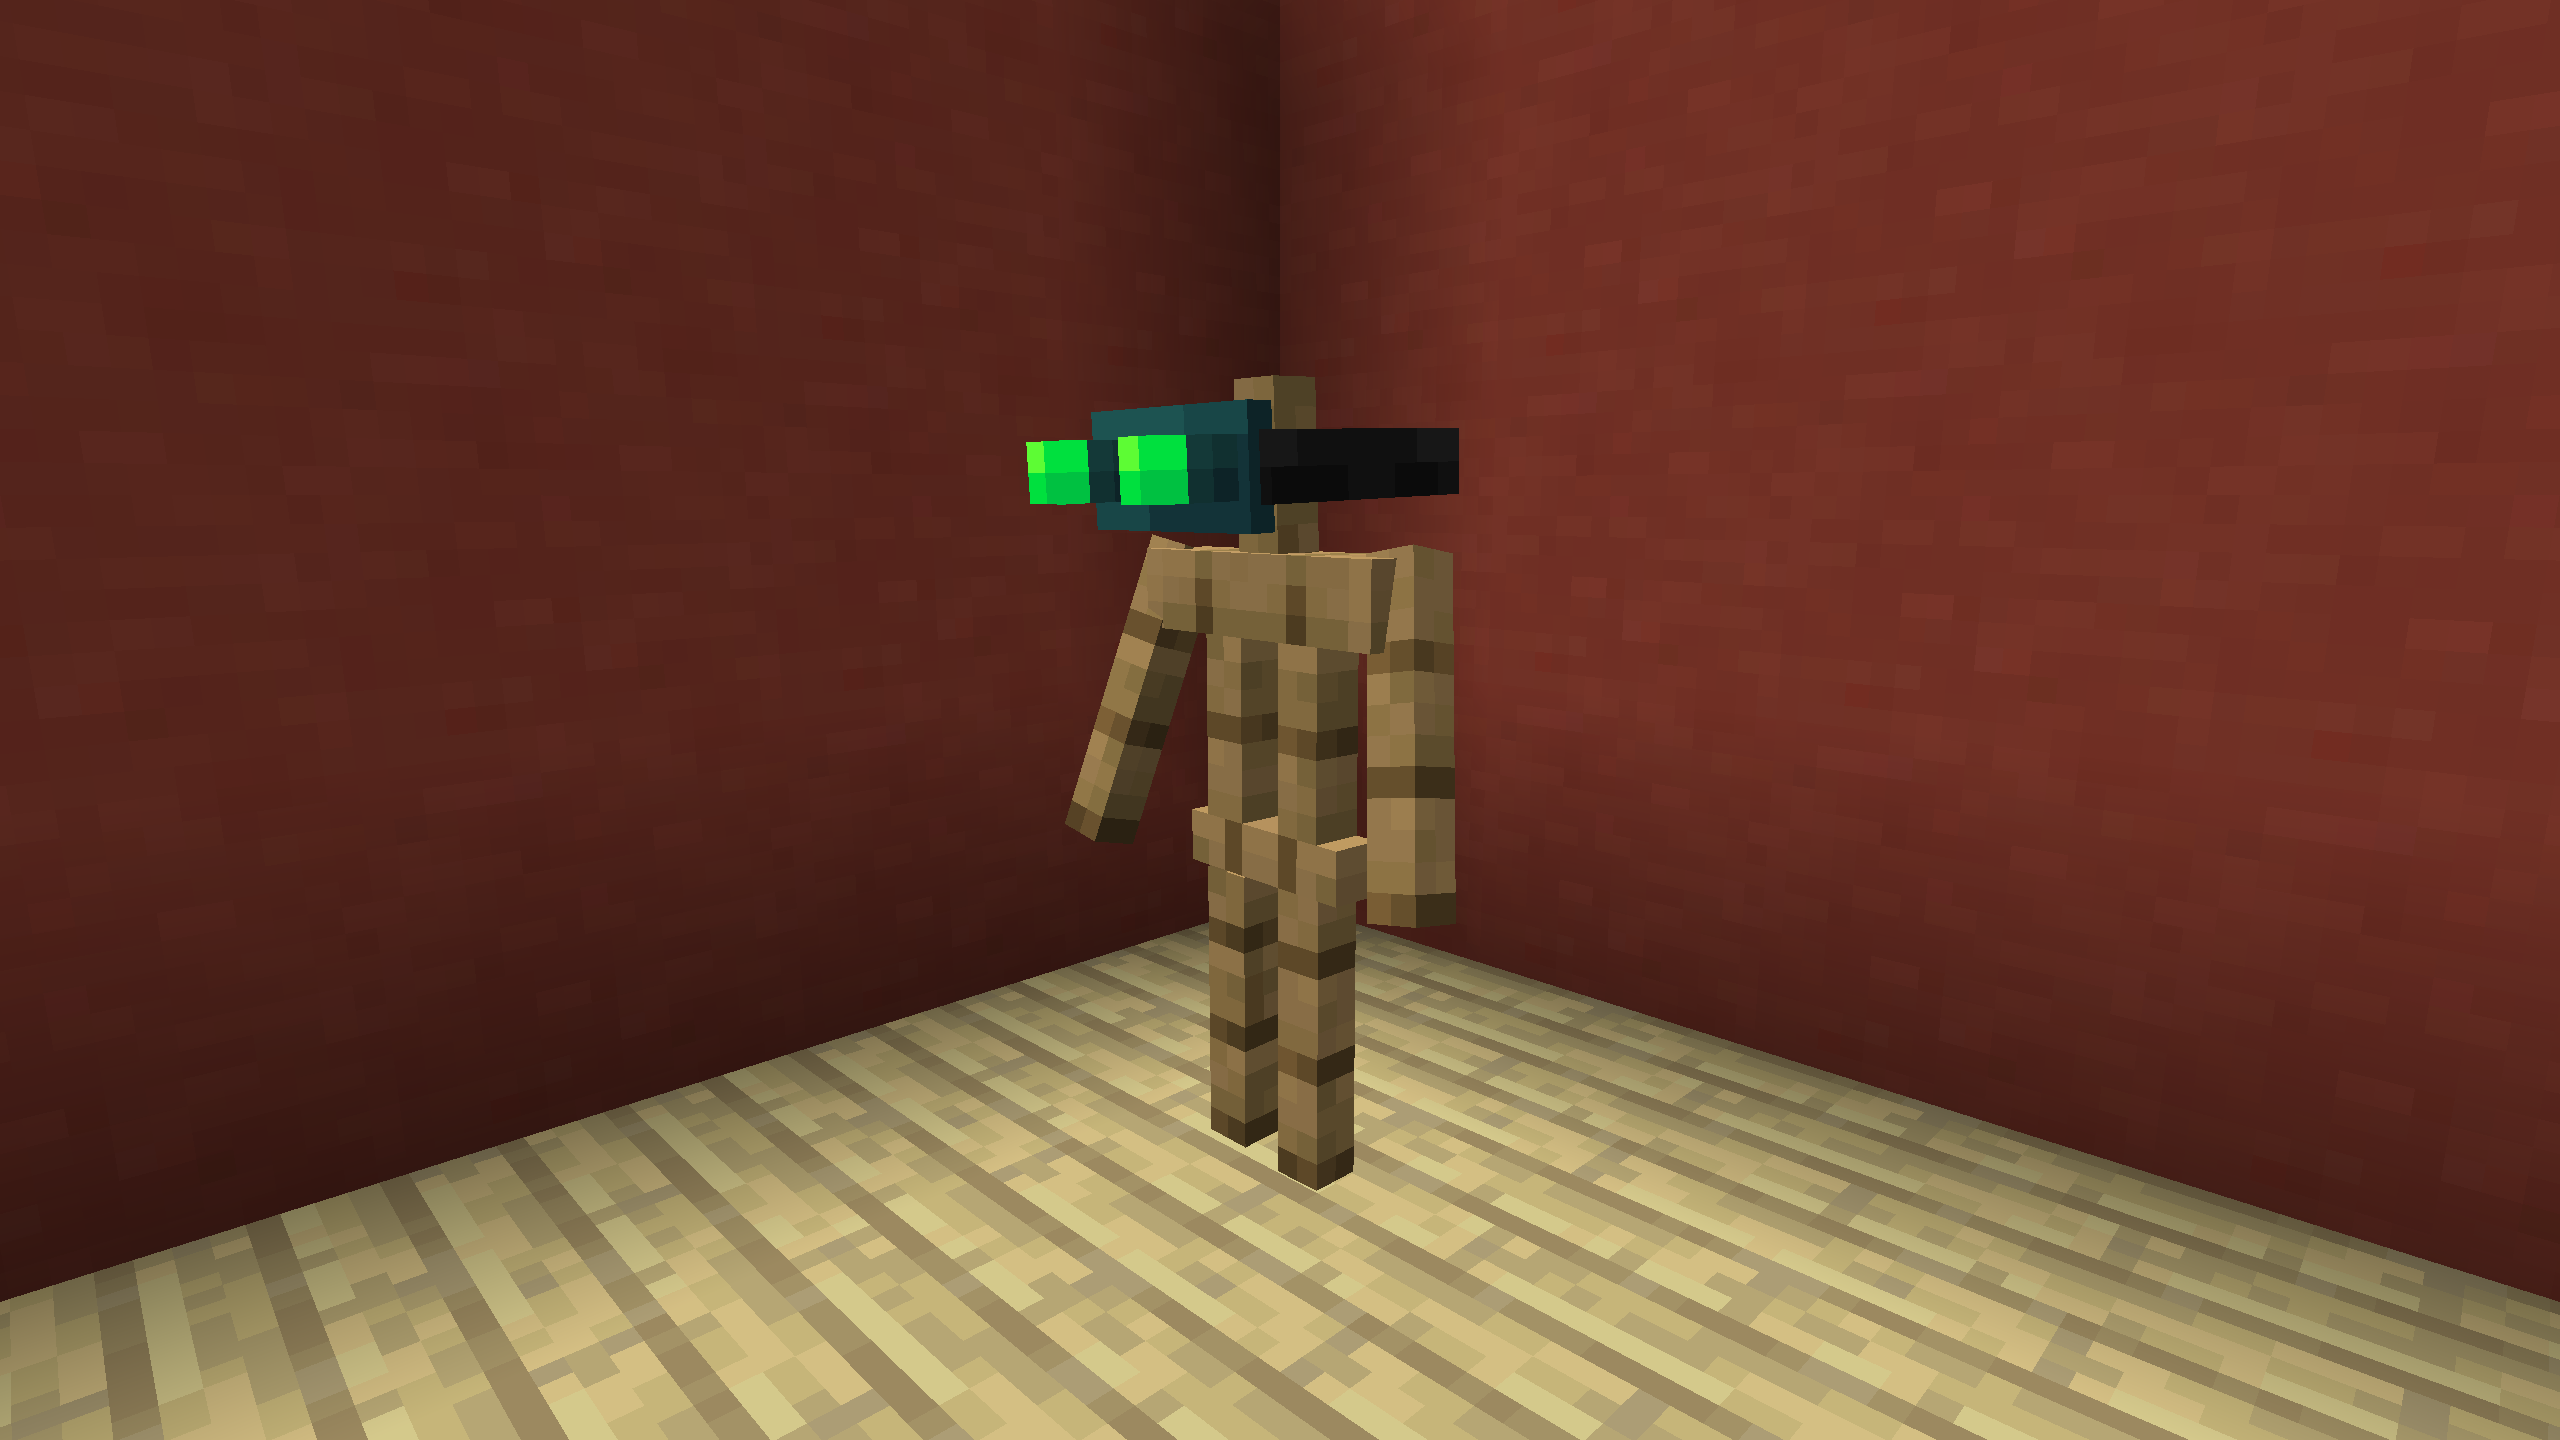 Night Vision Goggles from the artifact mod to give an example